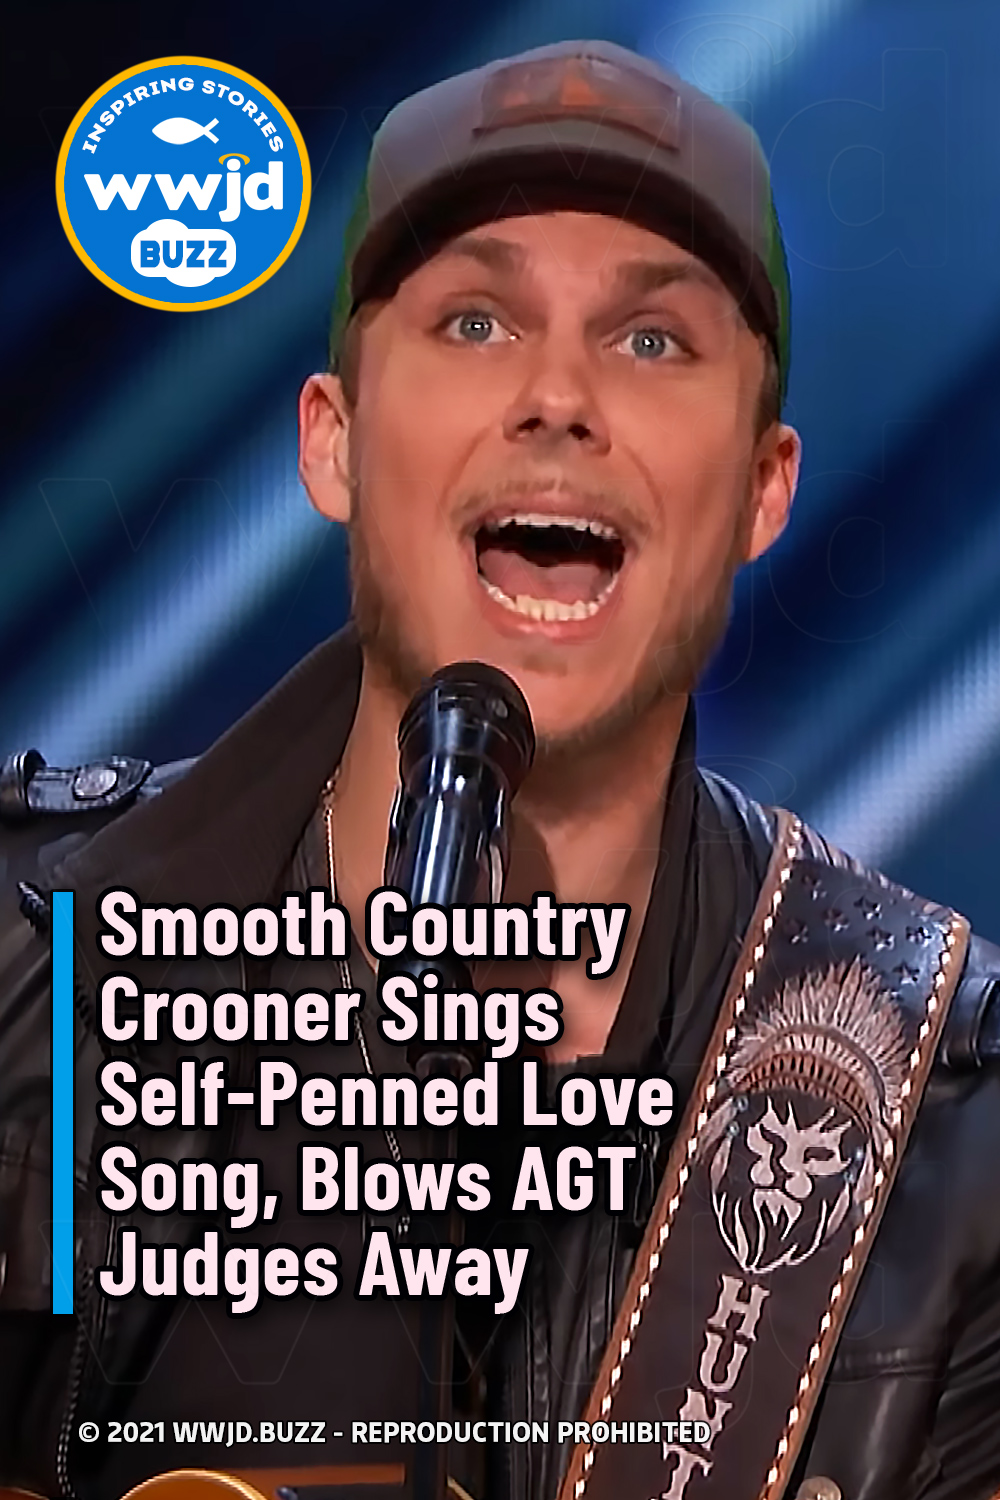 Smooth Country Crooner Sings Self-Penned Love Song, Blows AGT Judges Away